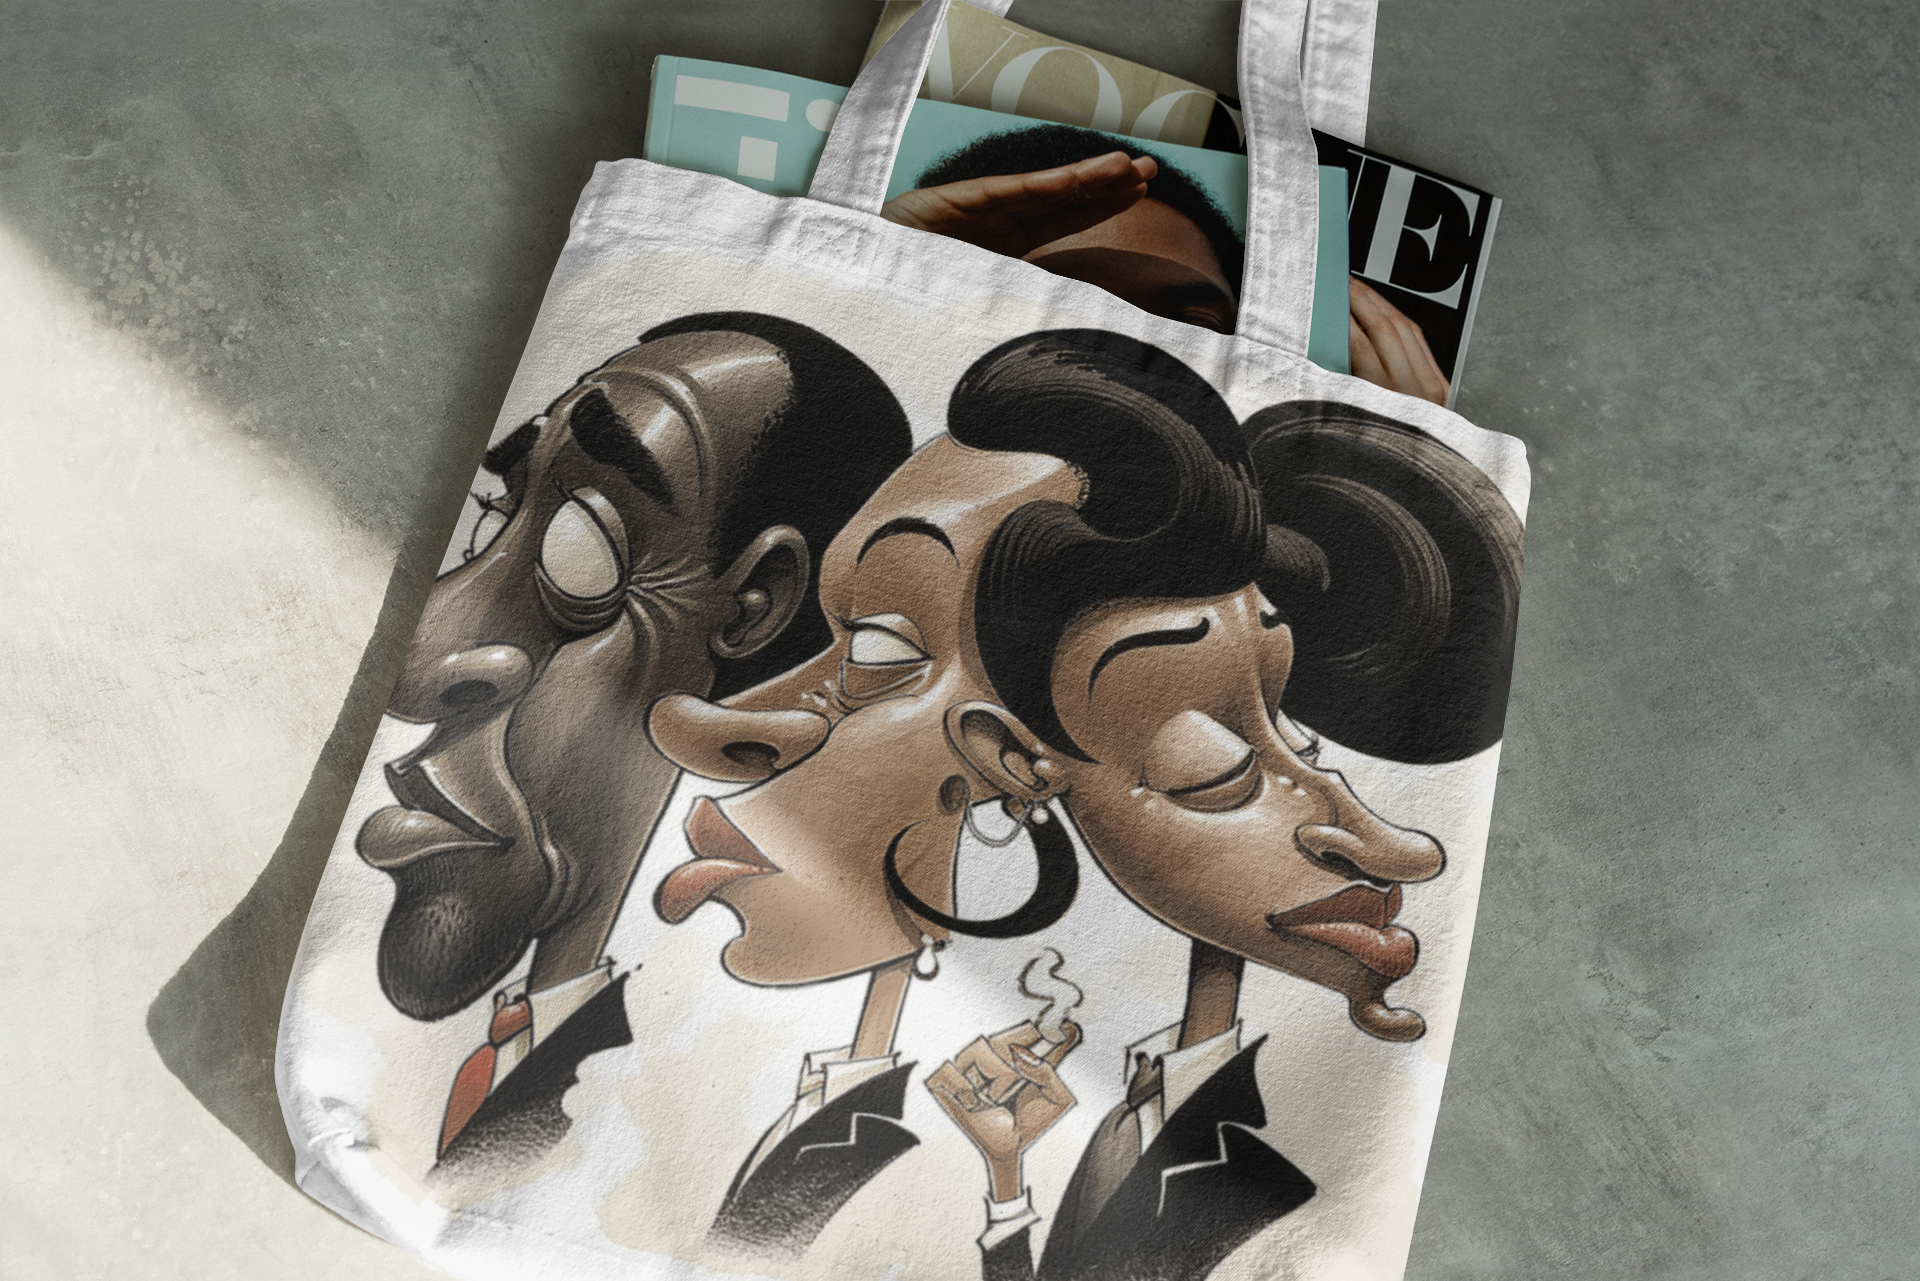 "JUS BOUGIE" - AFRICAN AMERICAN THEMED Tote Bag